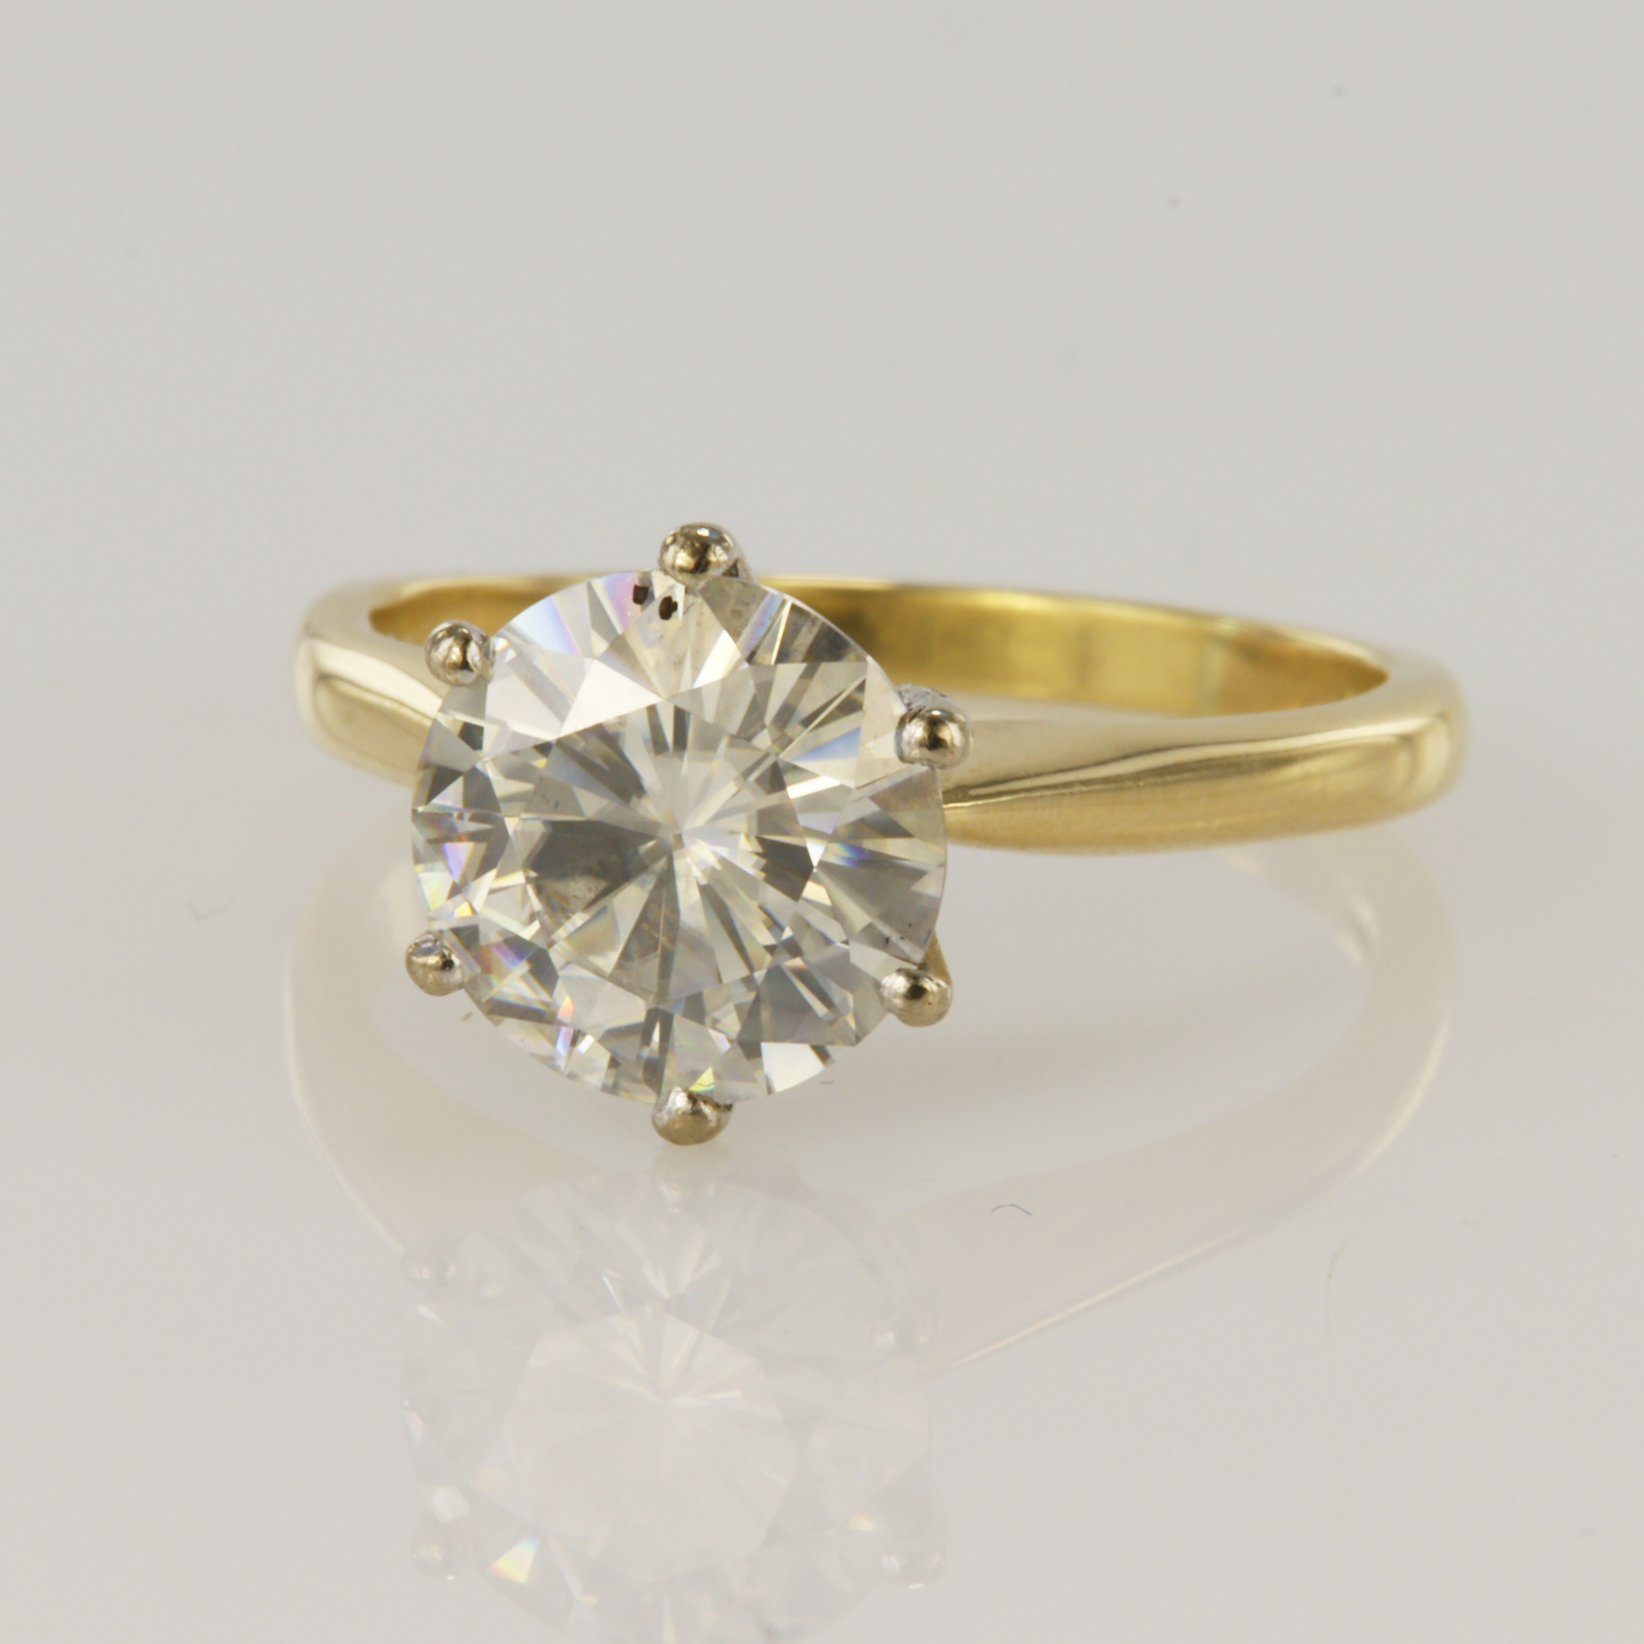 18ct yellow gold solitaire ring set with around brilliant cut 2.50ct Moissanite stone in a six